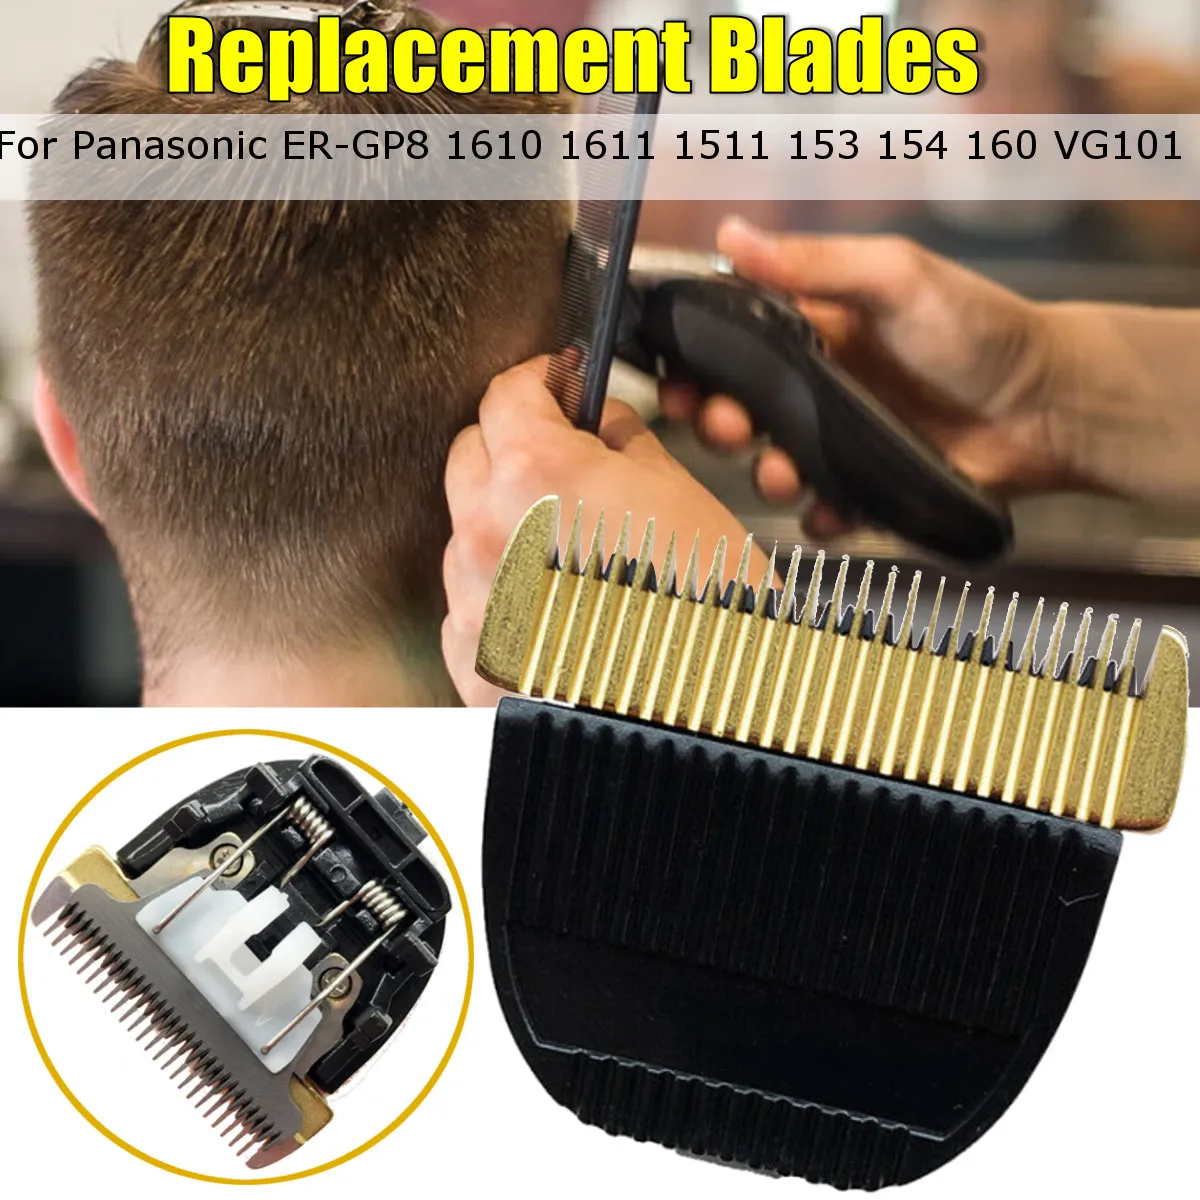 

Ceramic Titanium Replacement Clipper Blades for Panasonic ER-GP8 1610 1611 1511 153 154 160 VG101 Cutter Hair Grooming Trimmer